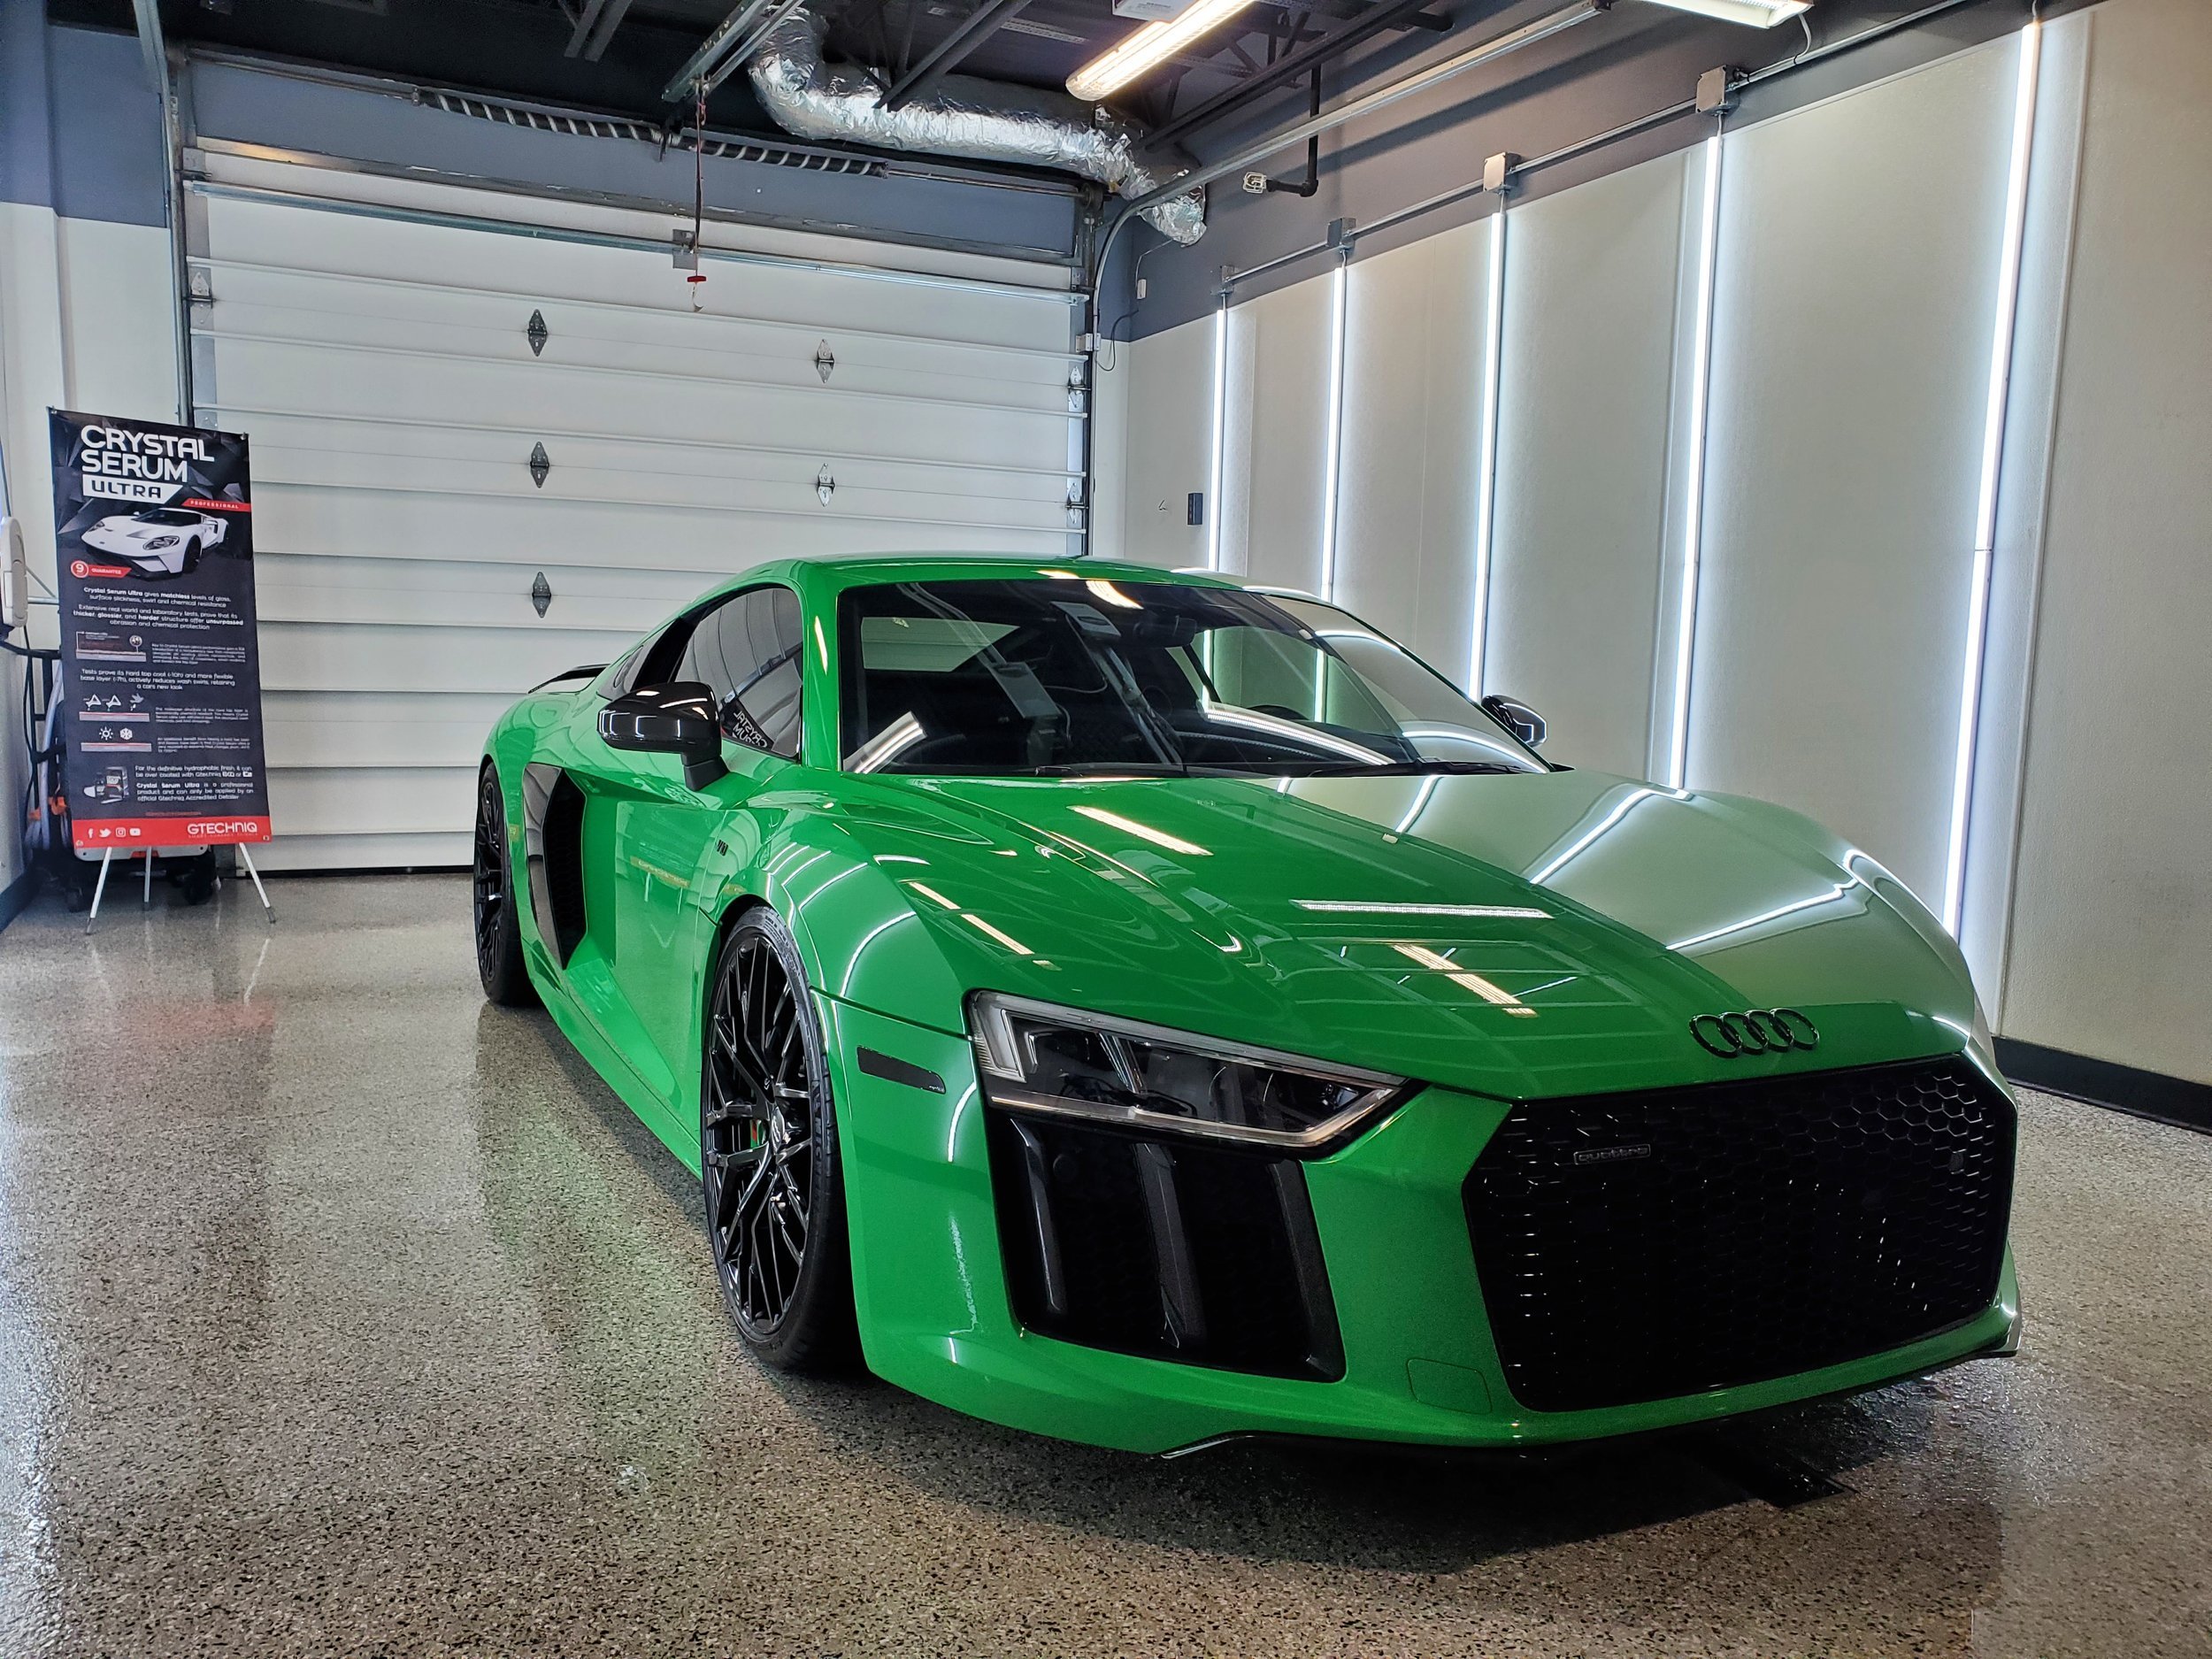 Buffalo Car Care- Paint Protection & Reconditioning Specialists in Buffalo,  NY